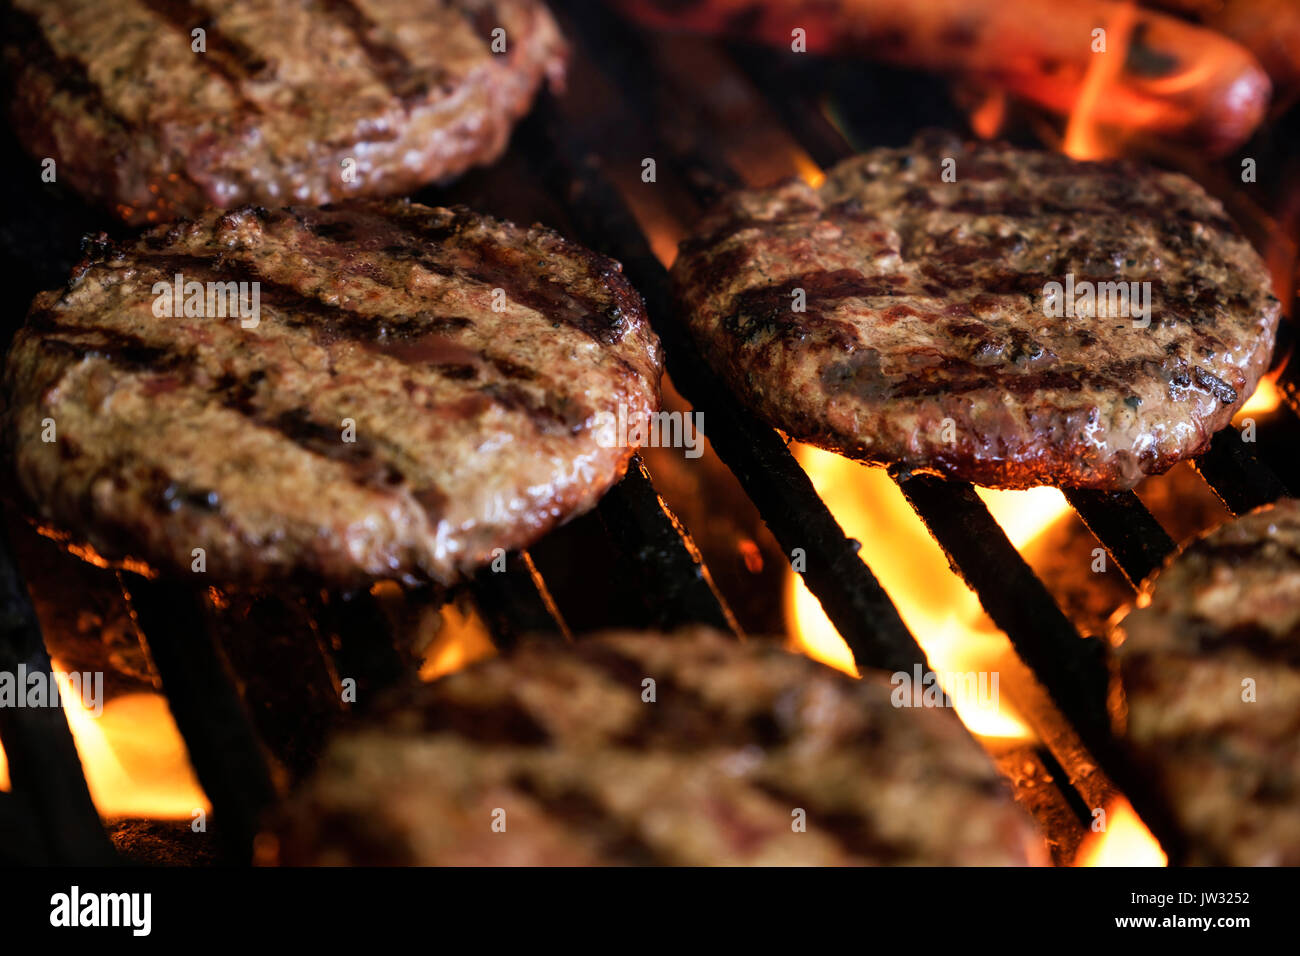 Hamburgers and hot dog on barbeque grill Stock Photo